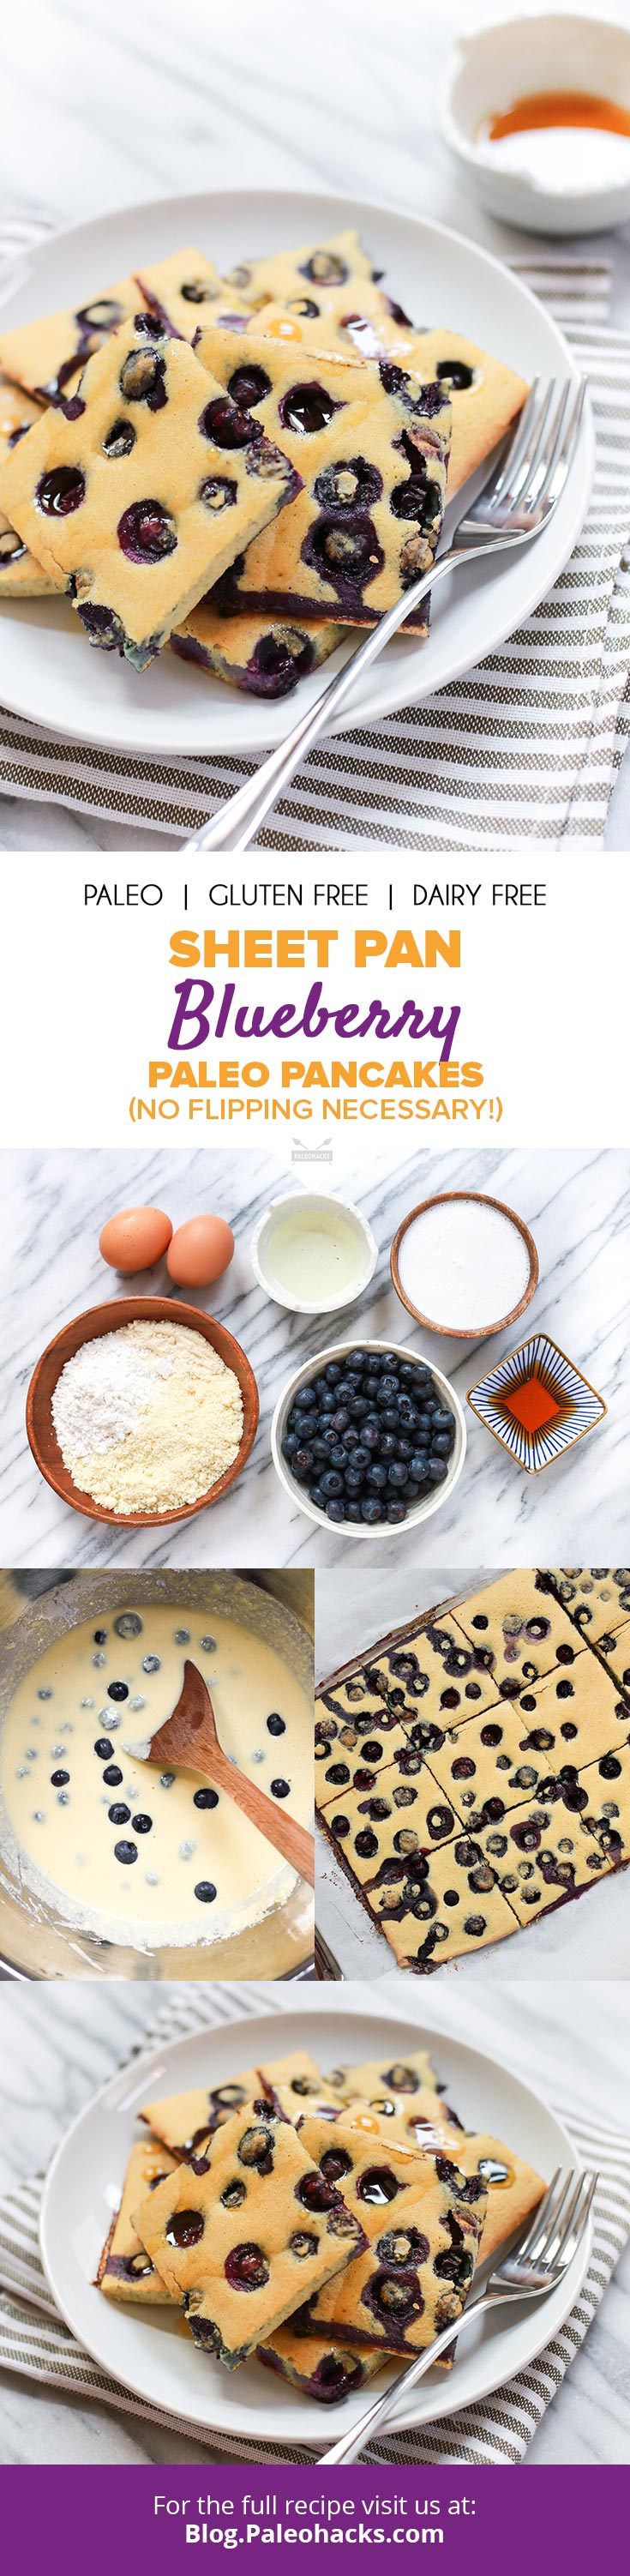 Whip up a big batch of blueberry pancakes right in the oven with this easy sheet pan recipe.